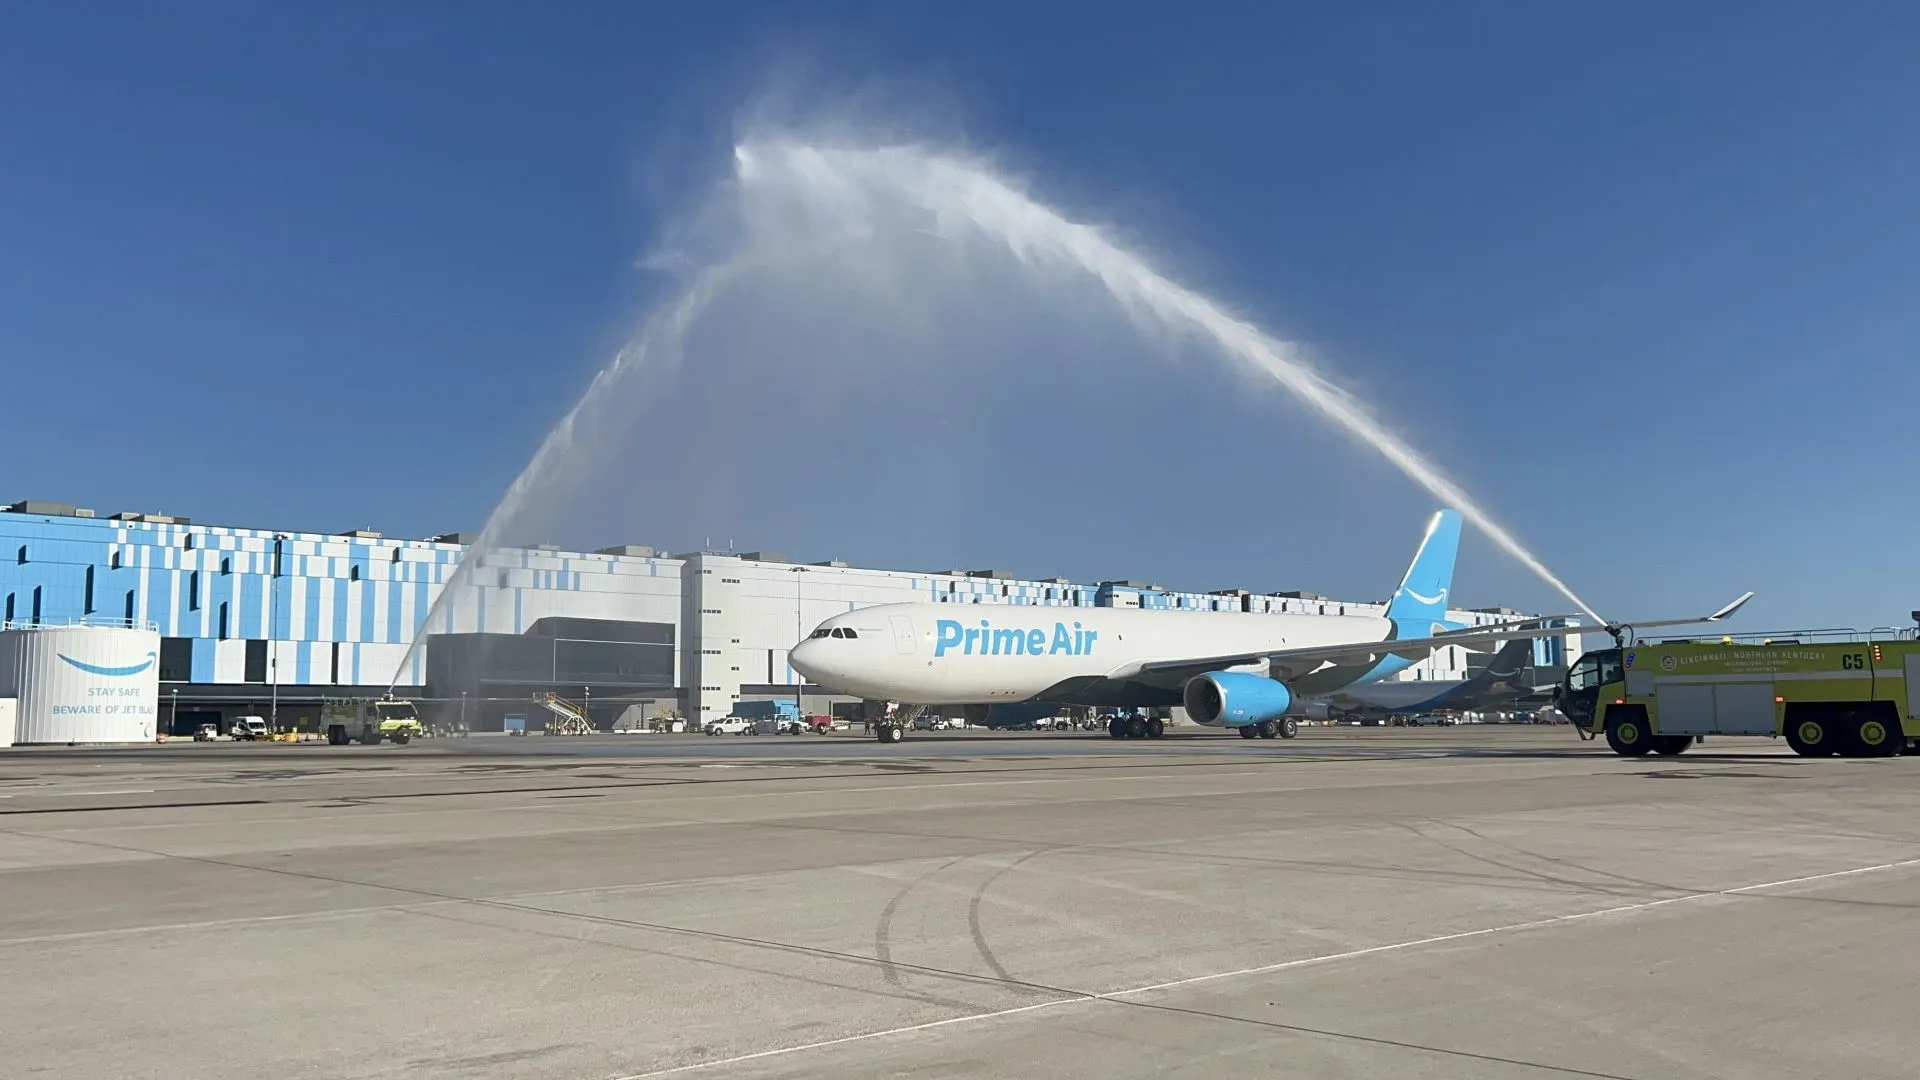 In a significant milestone for Amazon's air logistics network, the e-commerce giant's largest cargo jet, an Amazon Prime Air A330 freighter, has commenced operations.